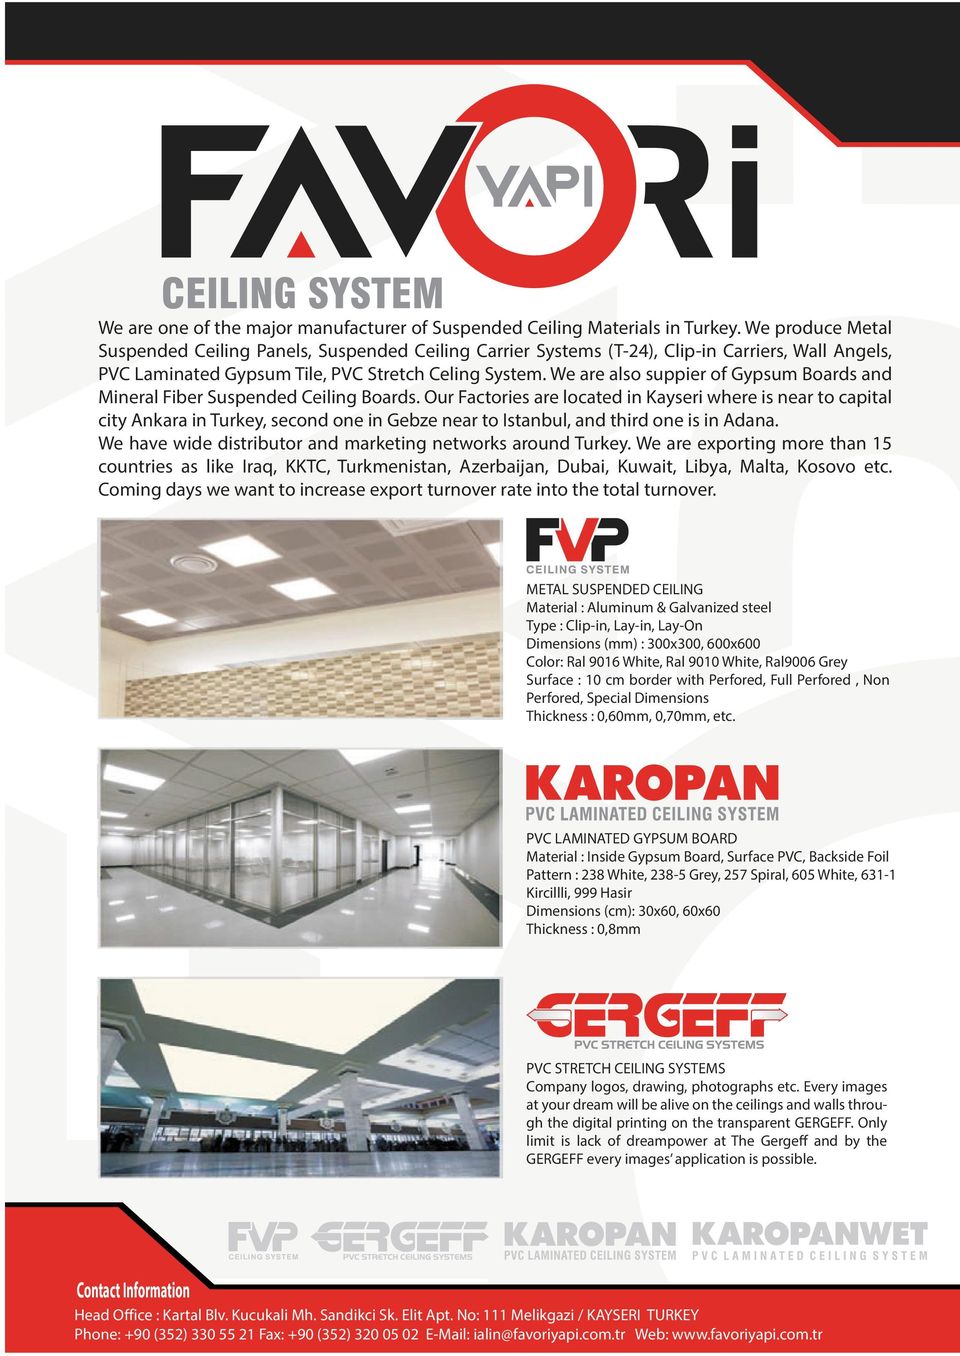 We are also suppier of Gypsum Boards and Mineral Fiber Suspended Ceiling Boards.